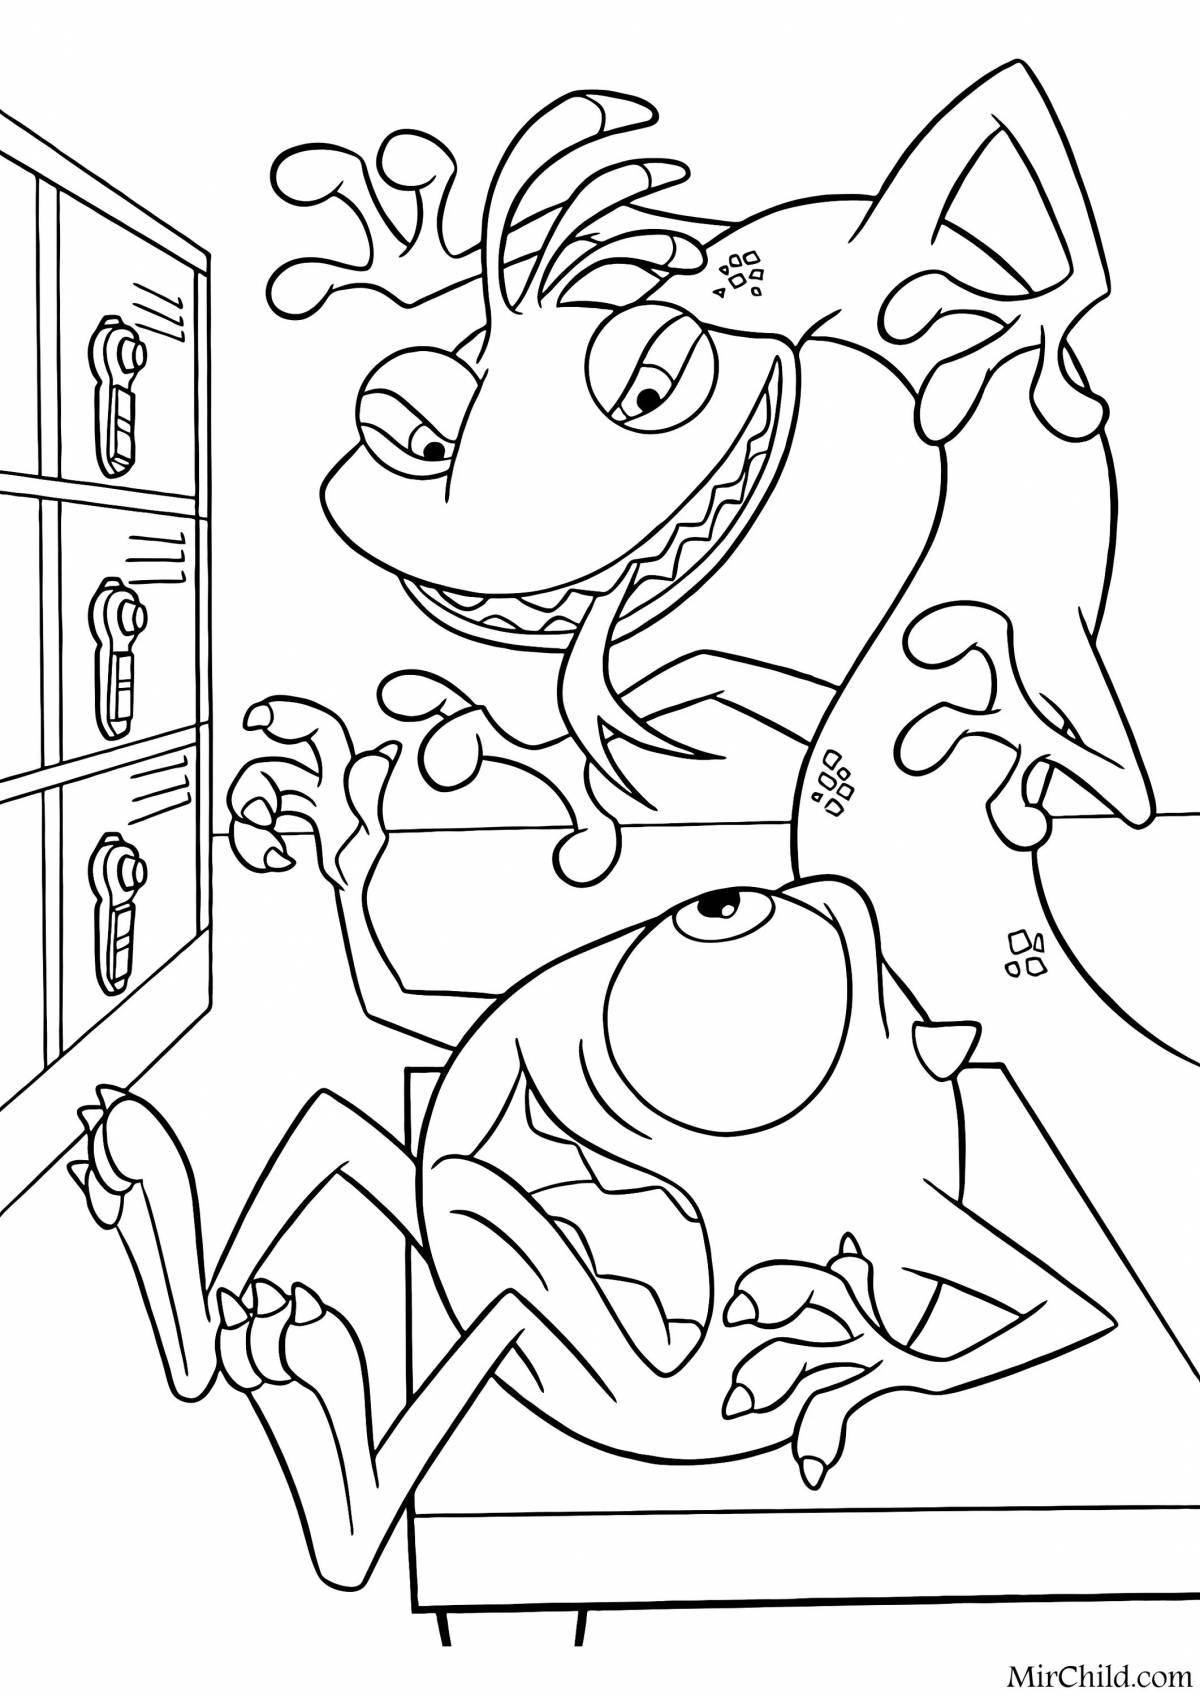 Malicious coloring monsters from the door